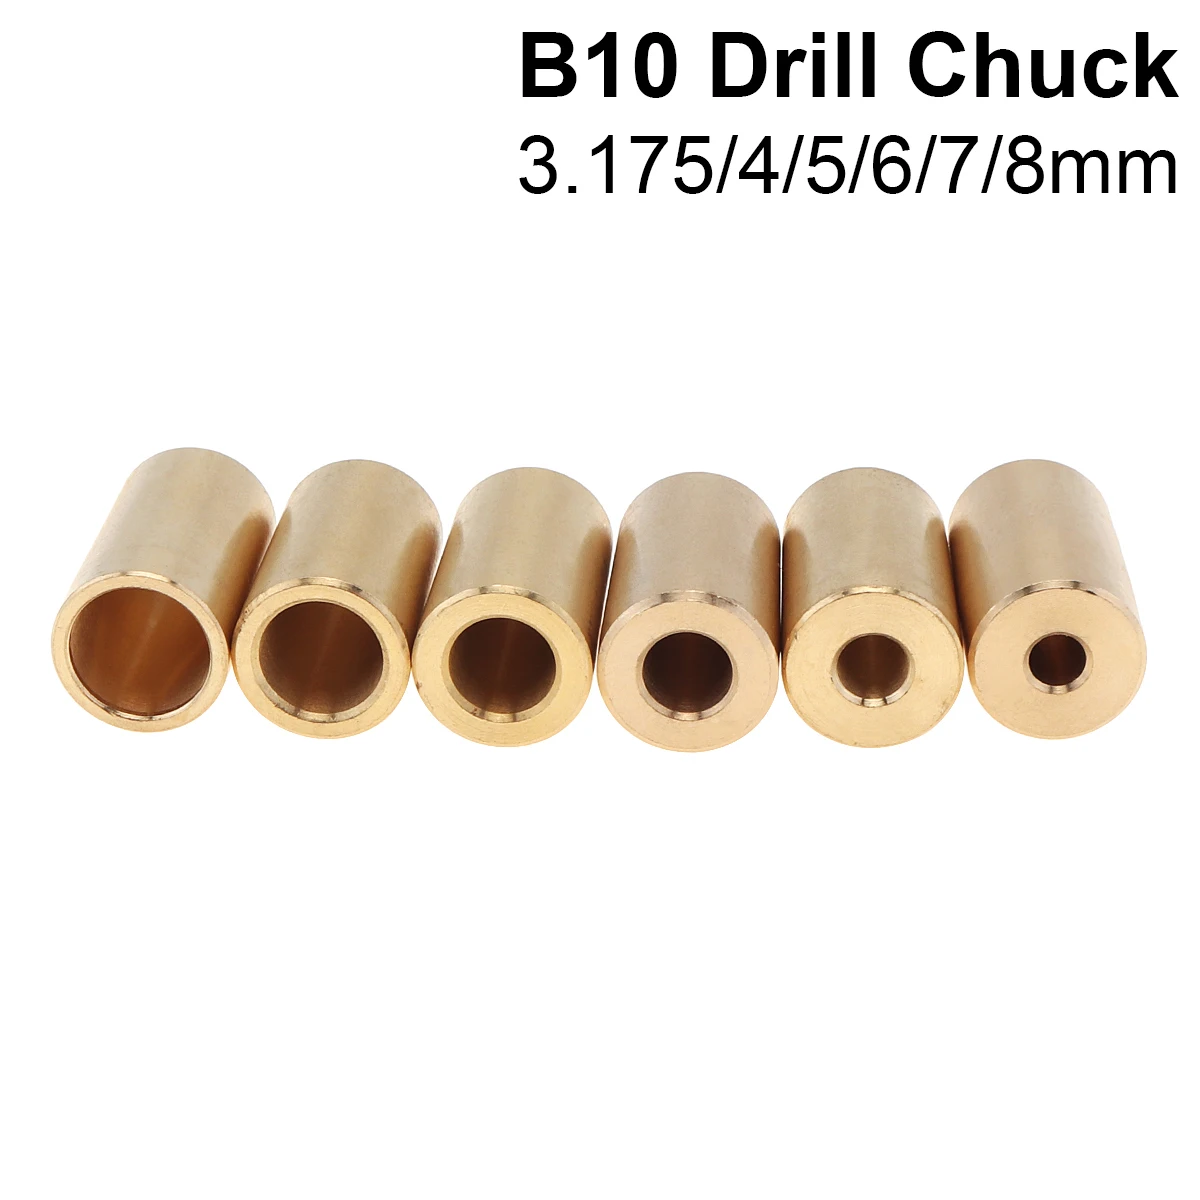 

B10 Connecting Rod Drill Chuck Sleeve Copper Taper Coupling 3.175mm/4mm/5mm/6mm/7mm/8mm